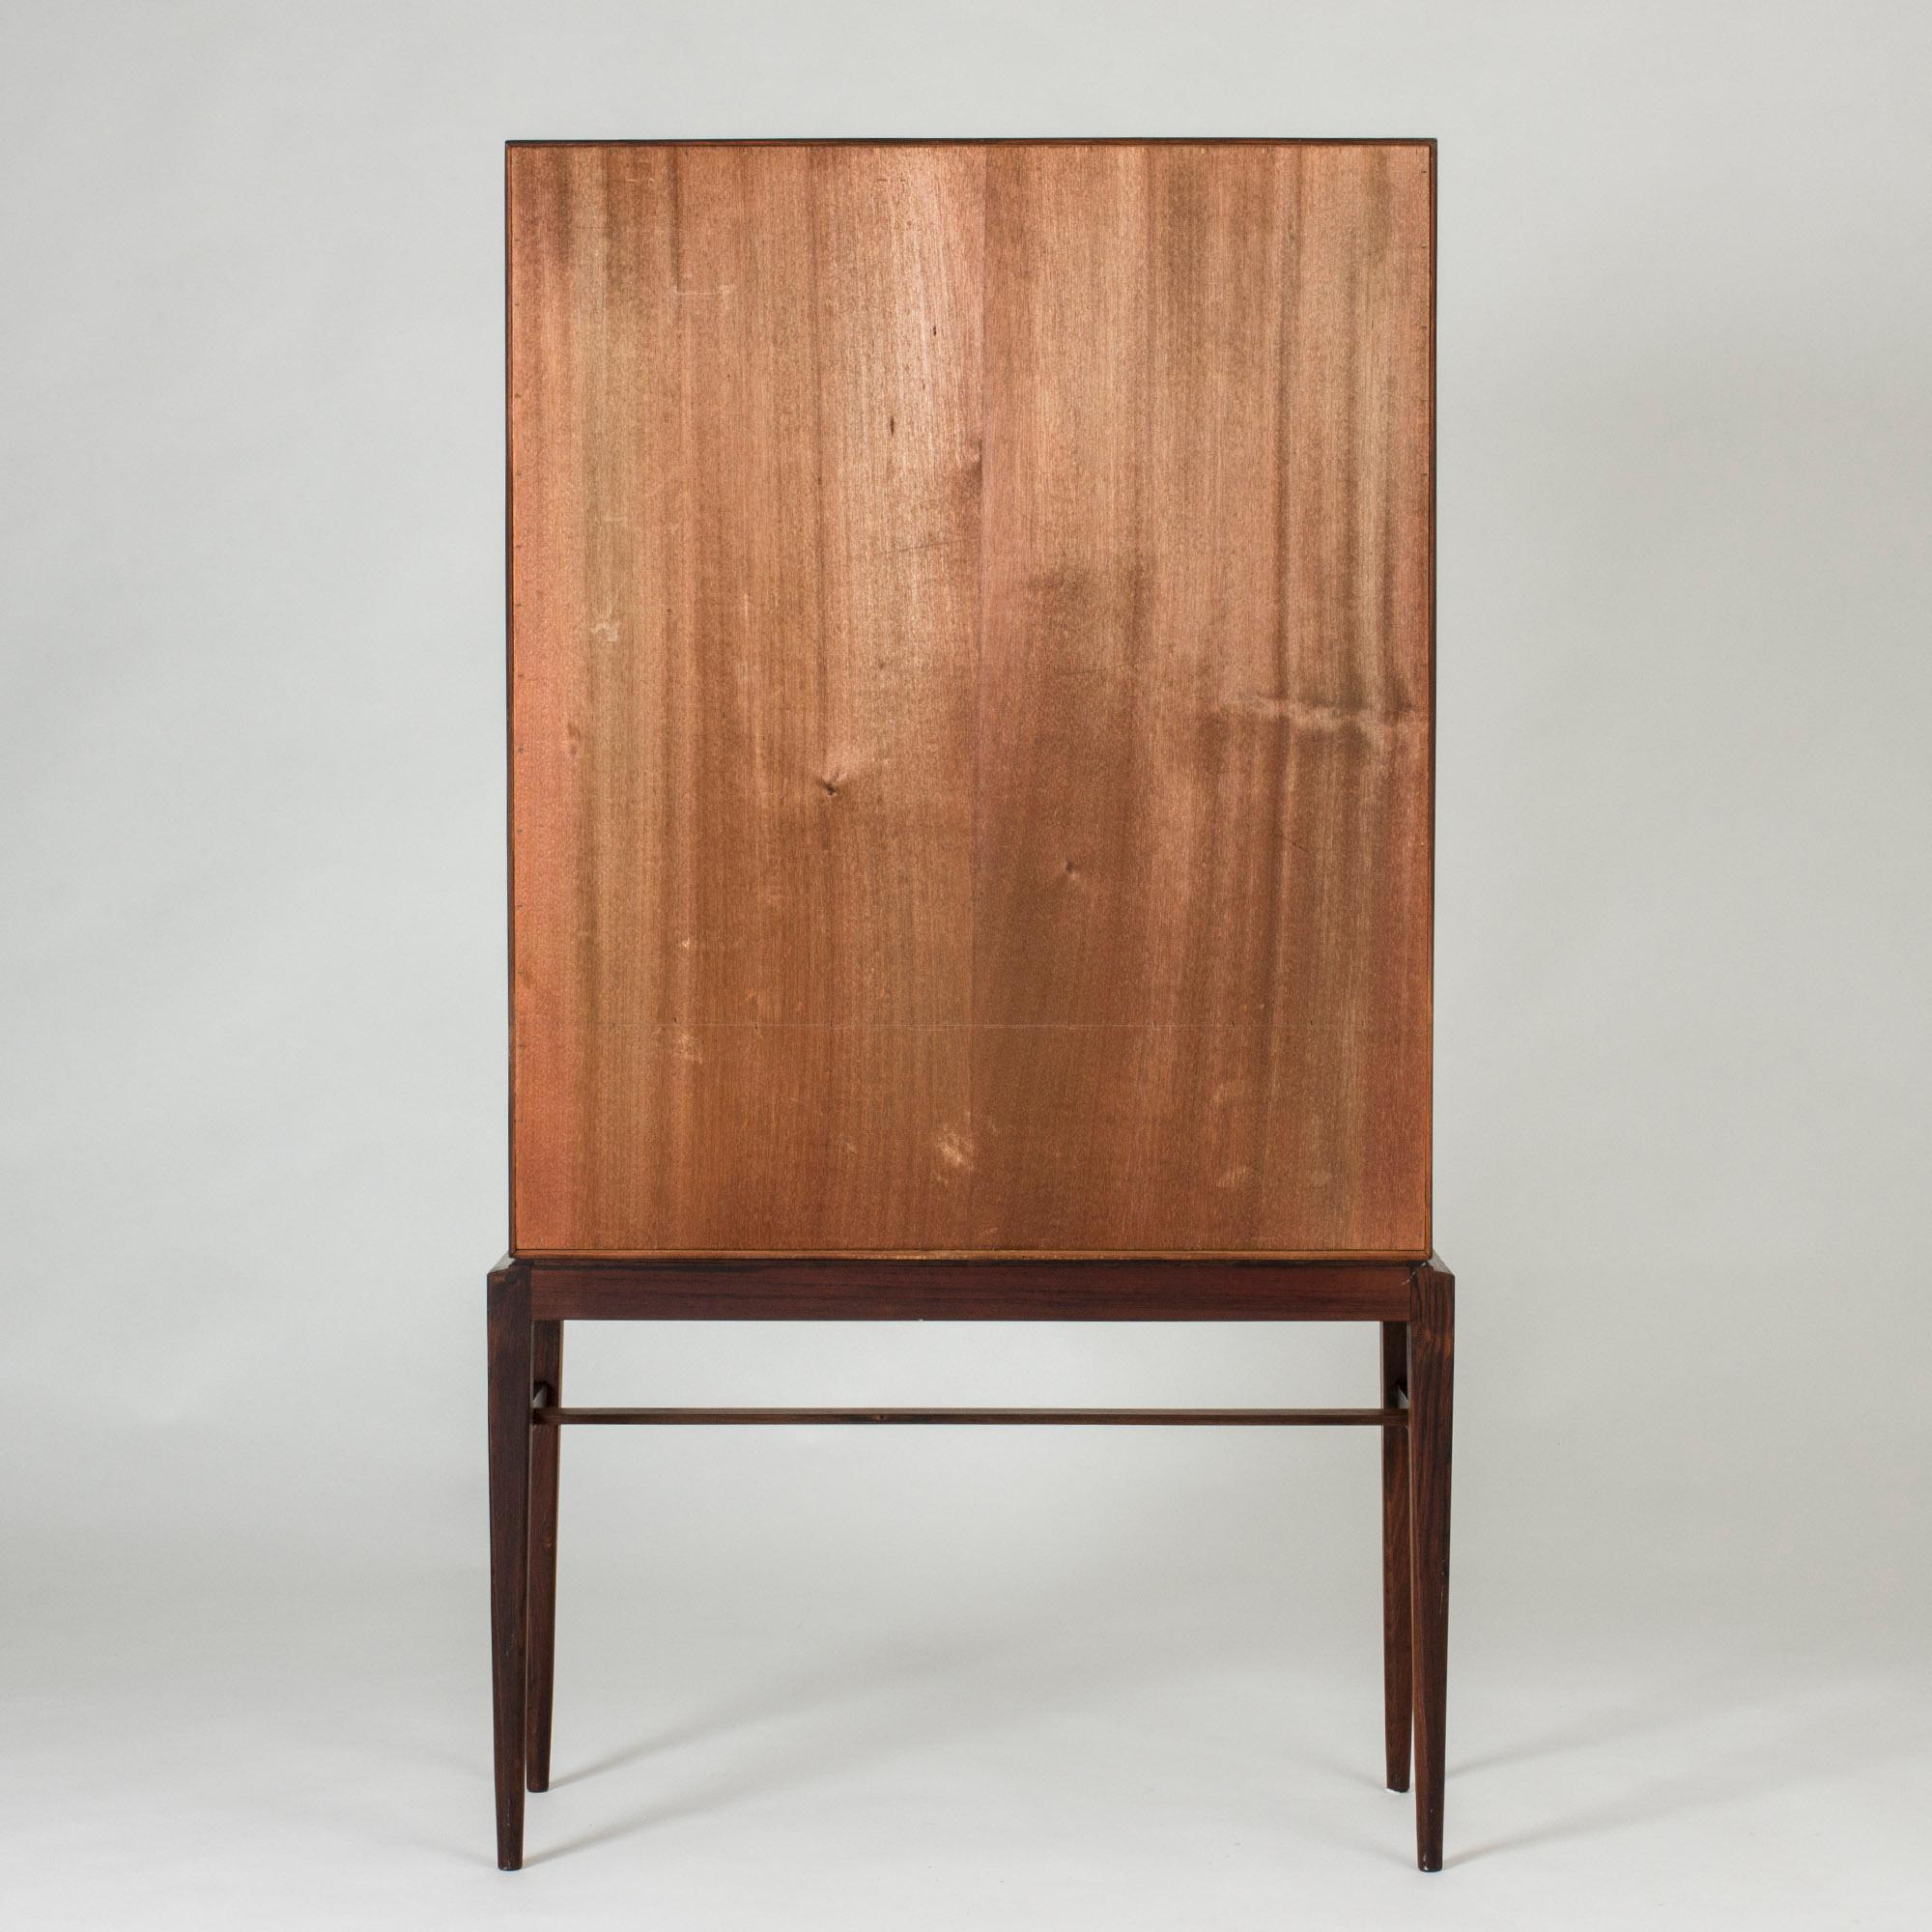 Midcentury Rosewood and Glass Vitrine Cabinet by Svante Skogh for Seffle 4